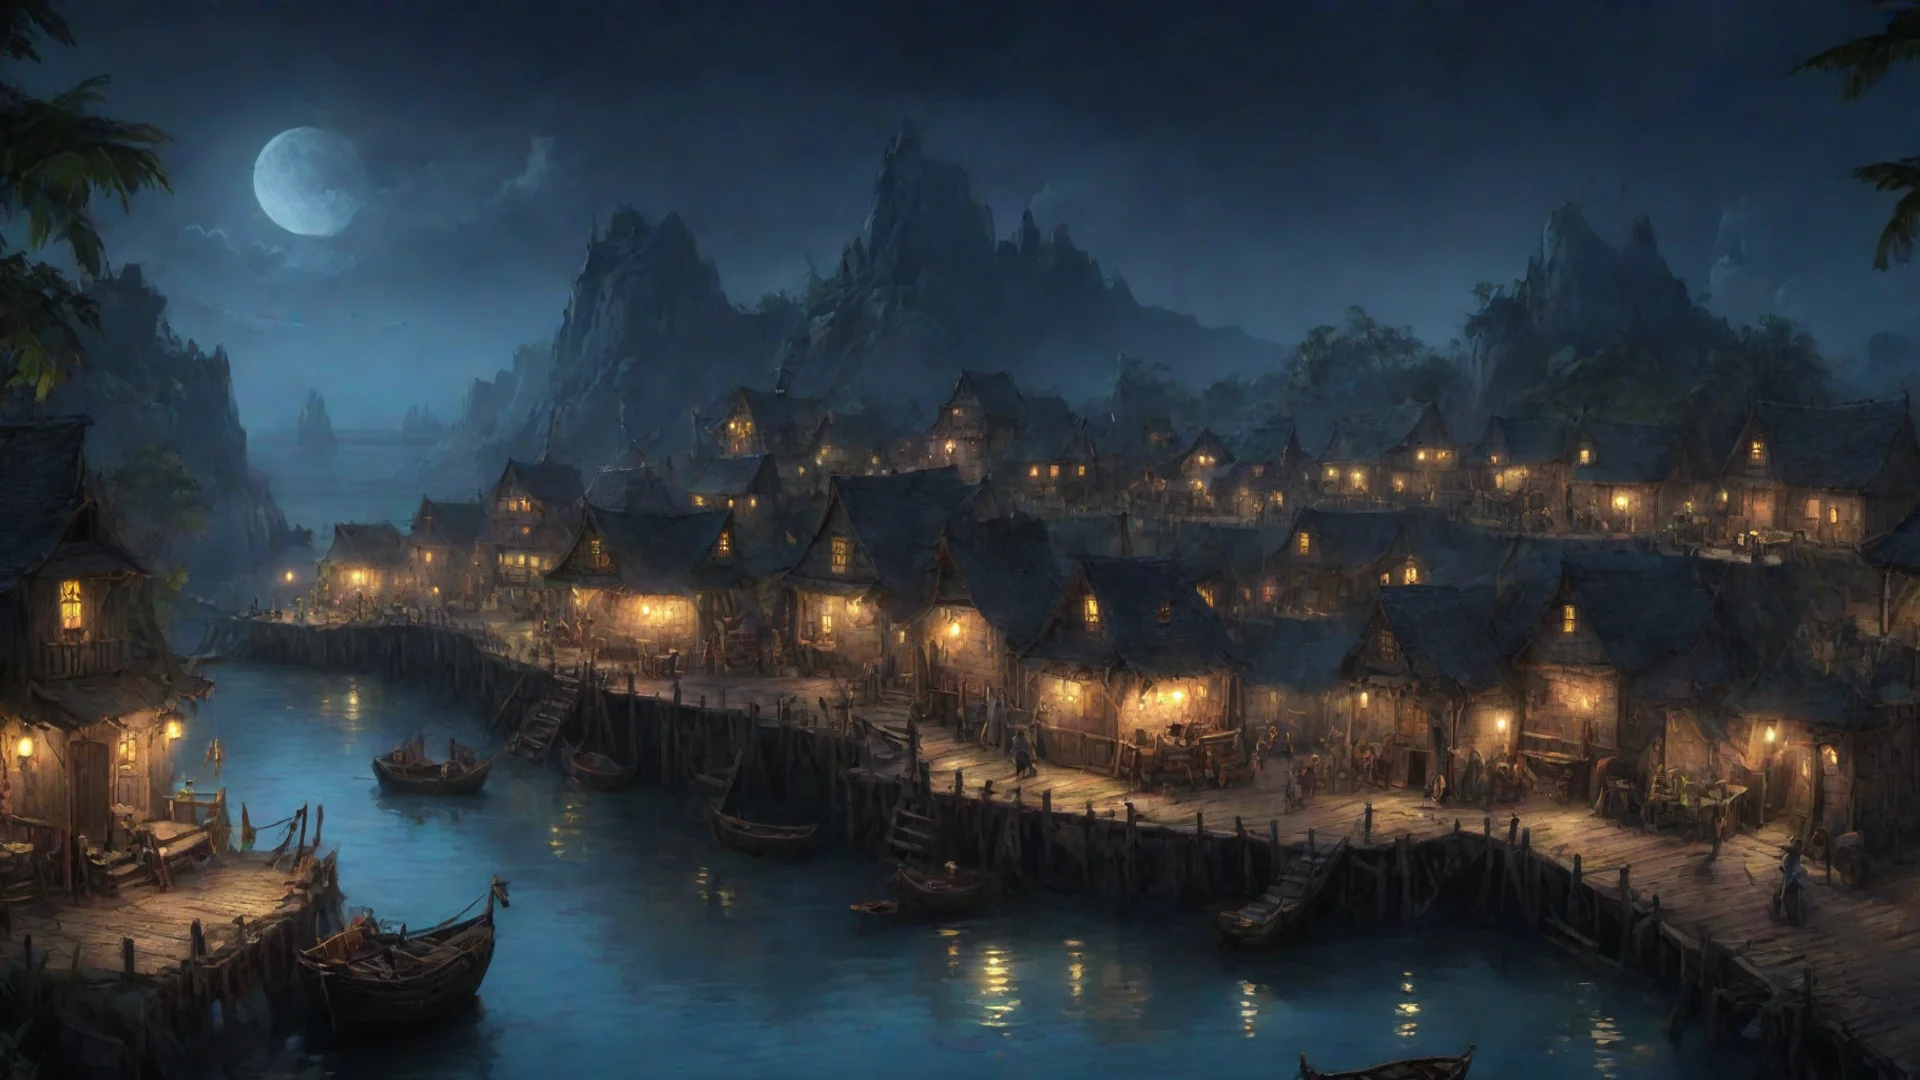 aiartstation art pirate village by night concept art confident engaging wow 3 wide